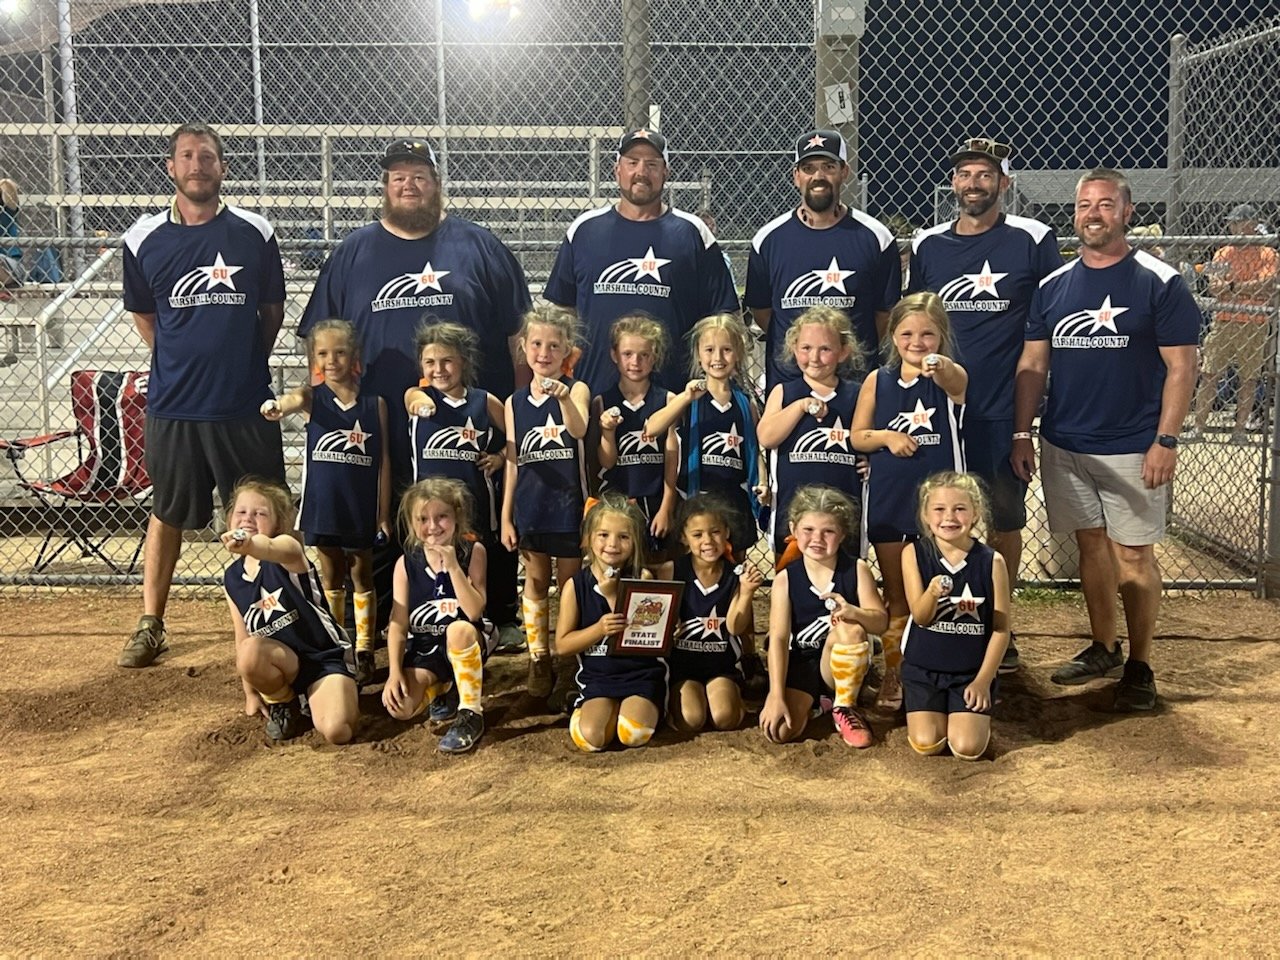 The Marshall County 6U softball team recently played in a pair of tournaments, winning the TSFA World Series, which was held in Ringgold, Georgia, where they won the 6U World Series championship.
They also competed in the SUGF Summer state tournament and finished runner-up. 
In two tournaments, the team put together a 9-3-1 overall record.
Competing with the team were (front, from left) McKartie Osborne, Adalynn Henson, Finley Tietgens, Bristol Crawford, Baylann Giles, Elise Piersol; (middle, from left) Amelia Daws, Everleigh Romero, Aspen Pierceall, Blair Brewer, Leah Davis, Hannah McCormick, Lennon Veron; (back, from left) Coaches Tim Pierceall, Zack McCormick, Luke Brewer, Doug Giles, Ryan Tietens and Shane Piersol.